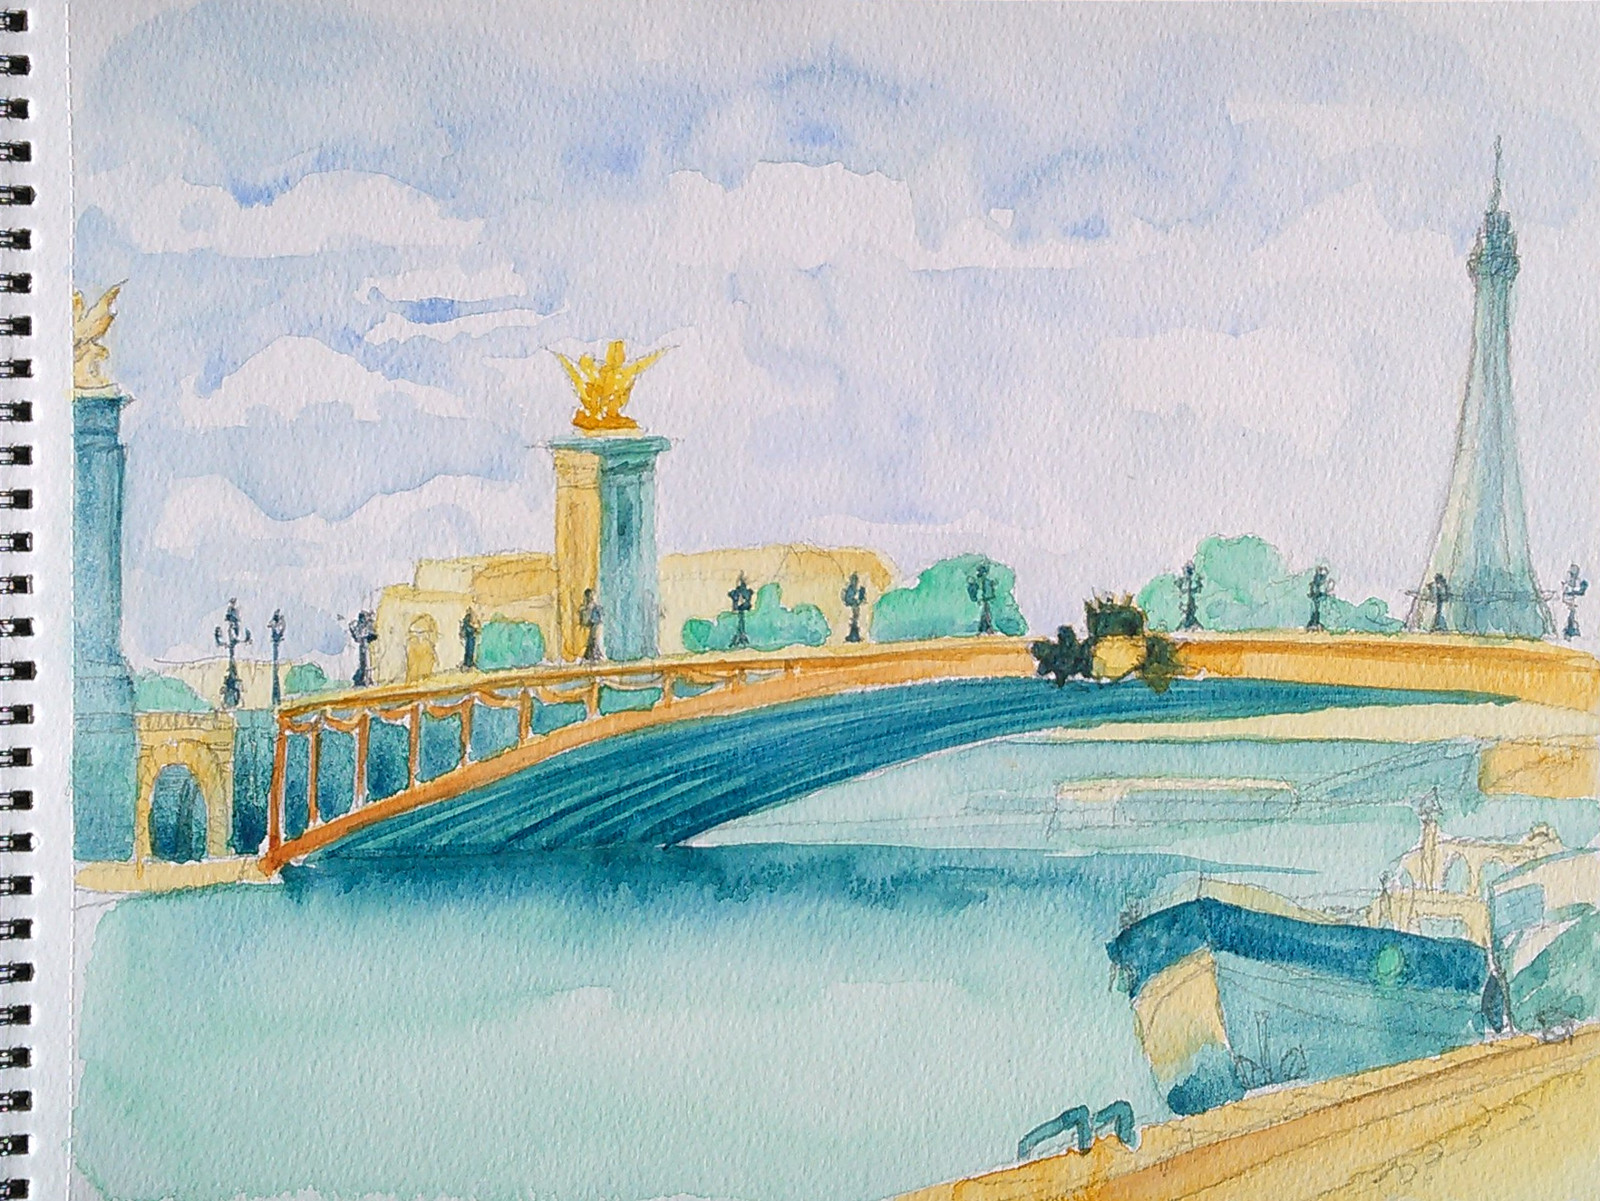 Watercolor of the Alexandre III bridge from the banks of the Seine